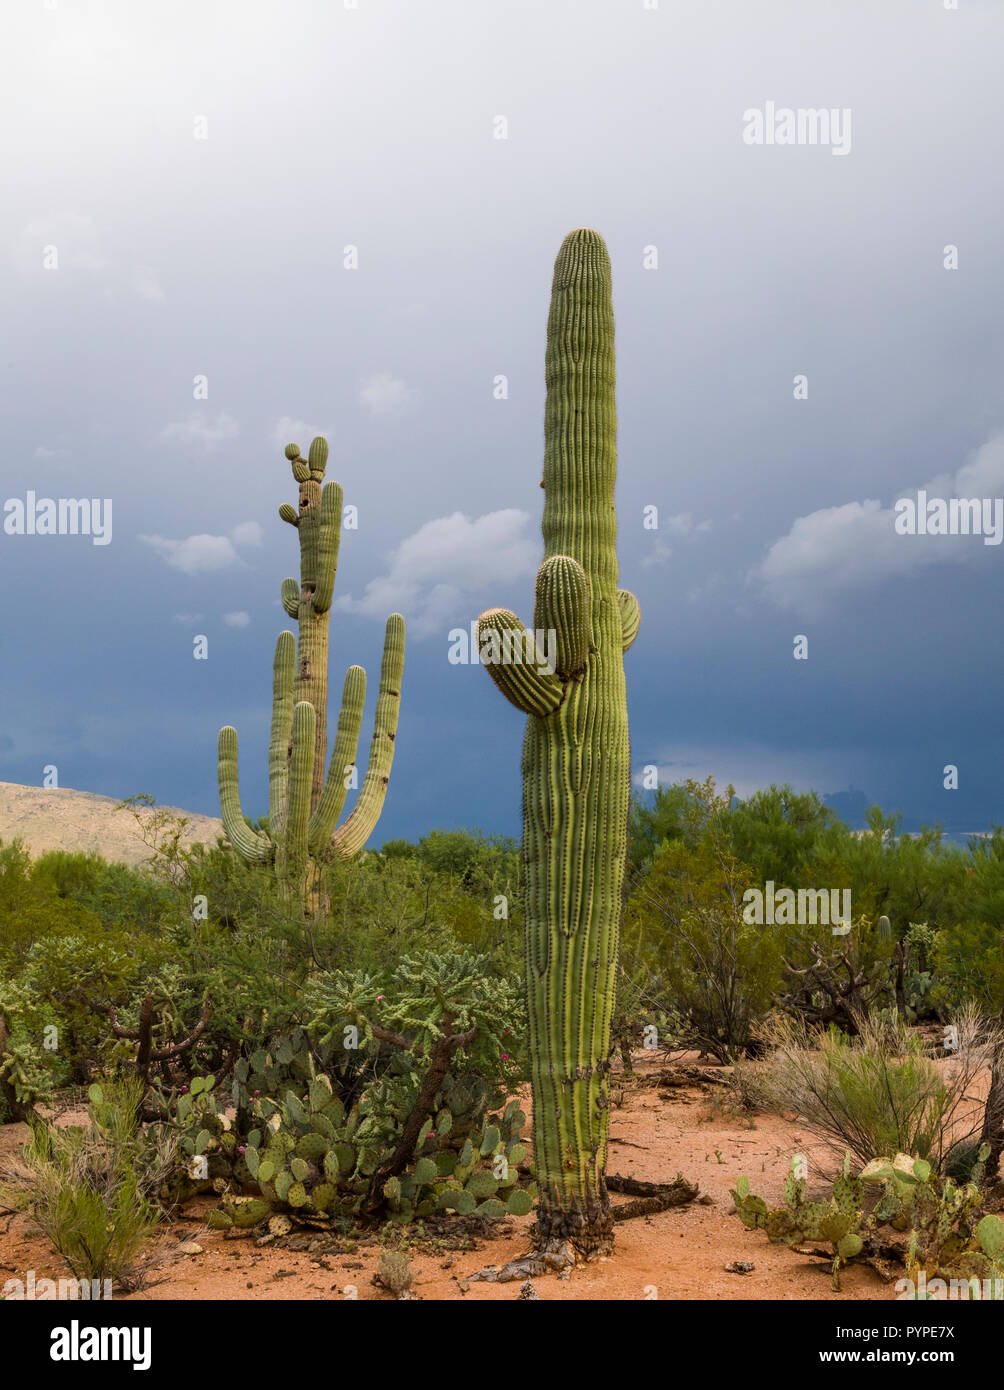 Young and Old Saguaros (Carnegiea gigantea) side-by-side in the Sonoran Desert, showing the difference in the number and size of arms and nest cavitie Stock Photo